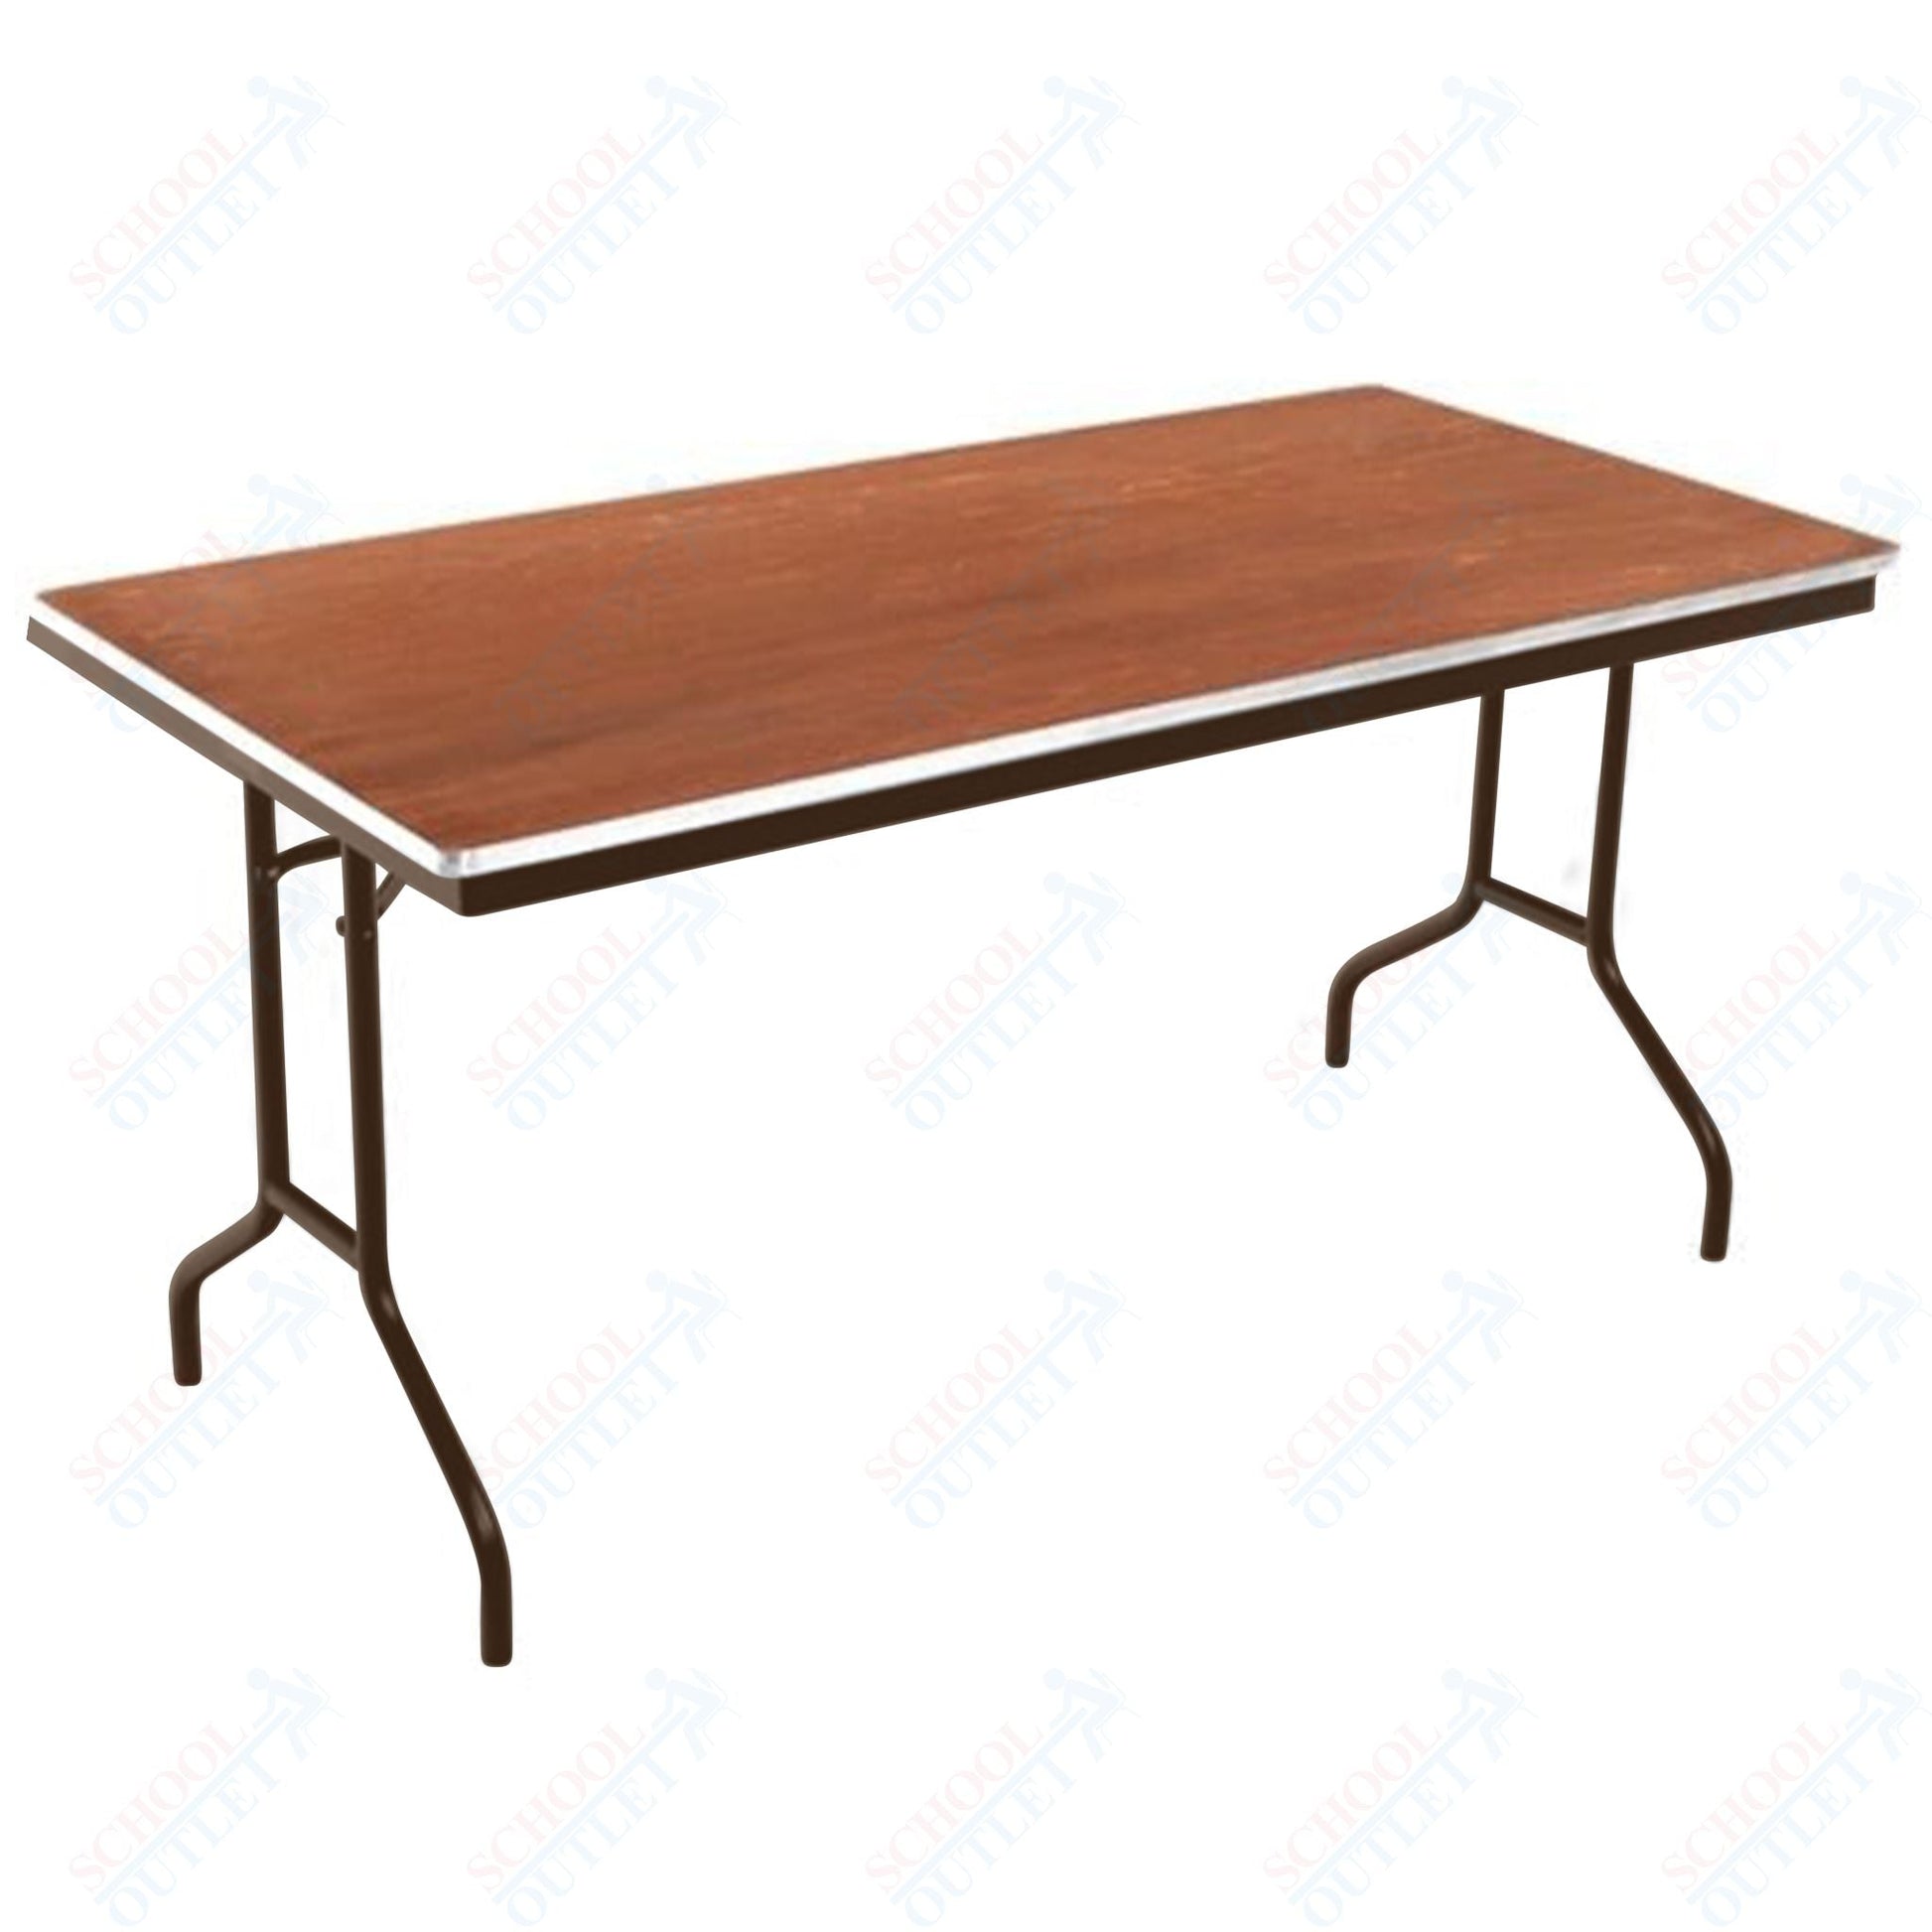 AmTab Folding Table - Plywood Stained and Sealed - Aluminum Edge - 18"W x 72"L x 29"H (AmTab AMT-186PA) - SchoolOutlet